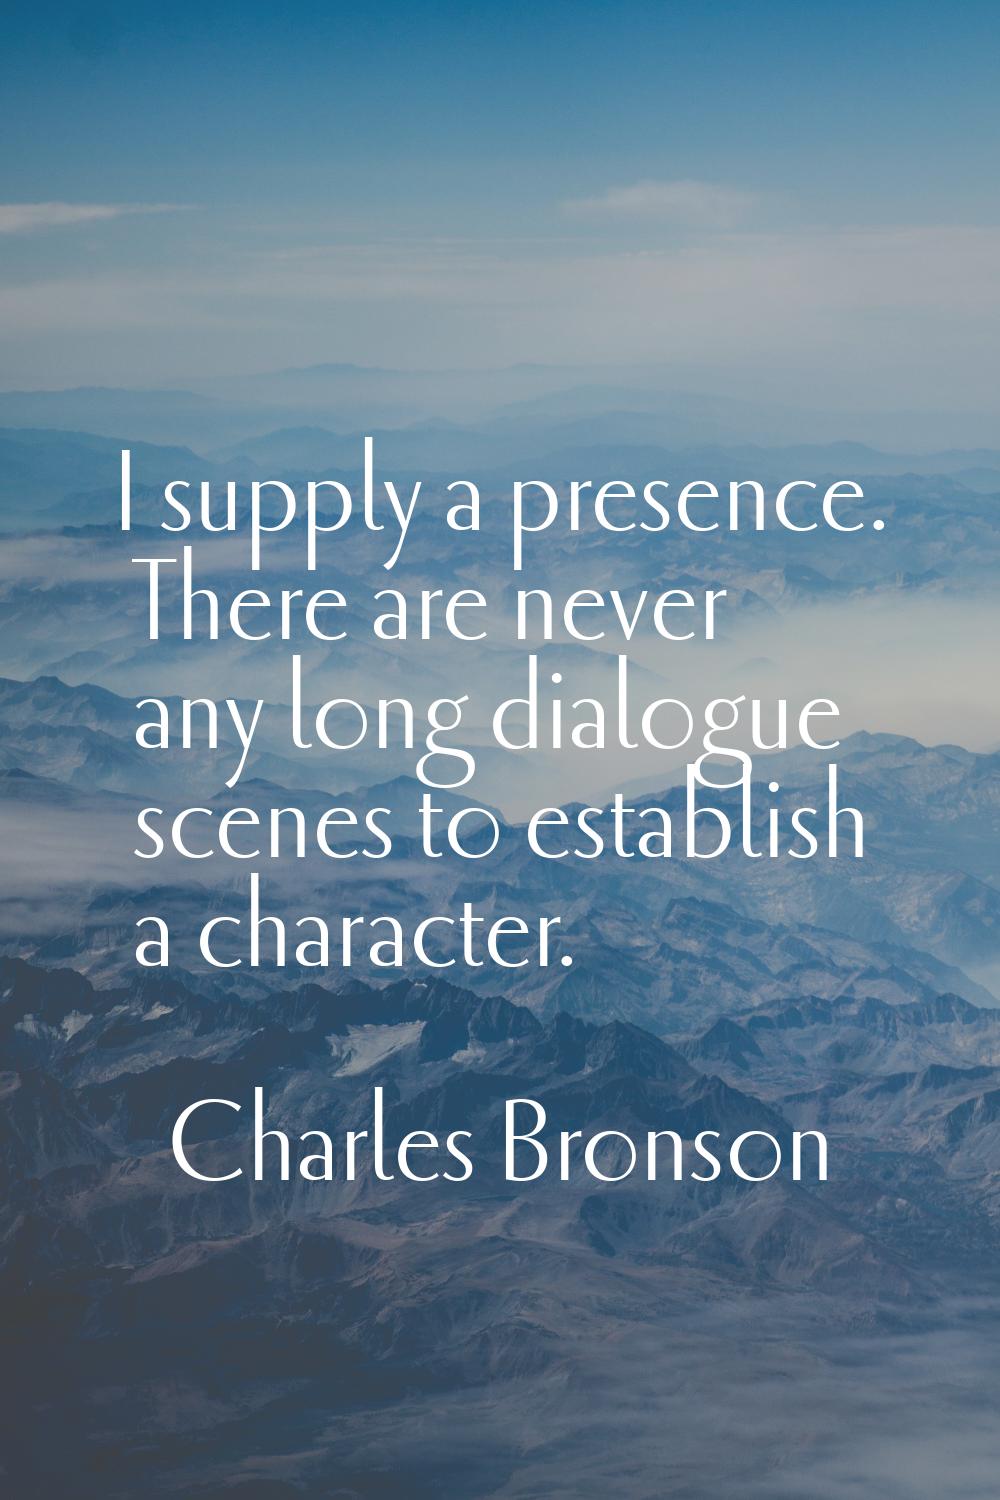 I supply a presence. There are never any long dialogue scenes to establish a character.